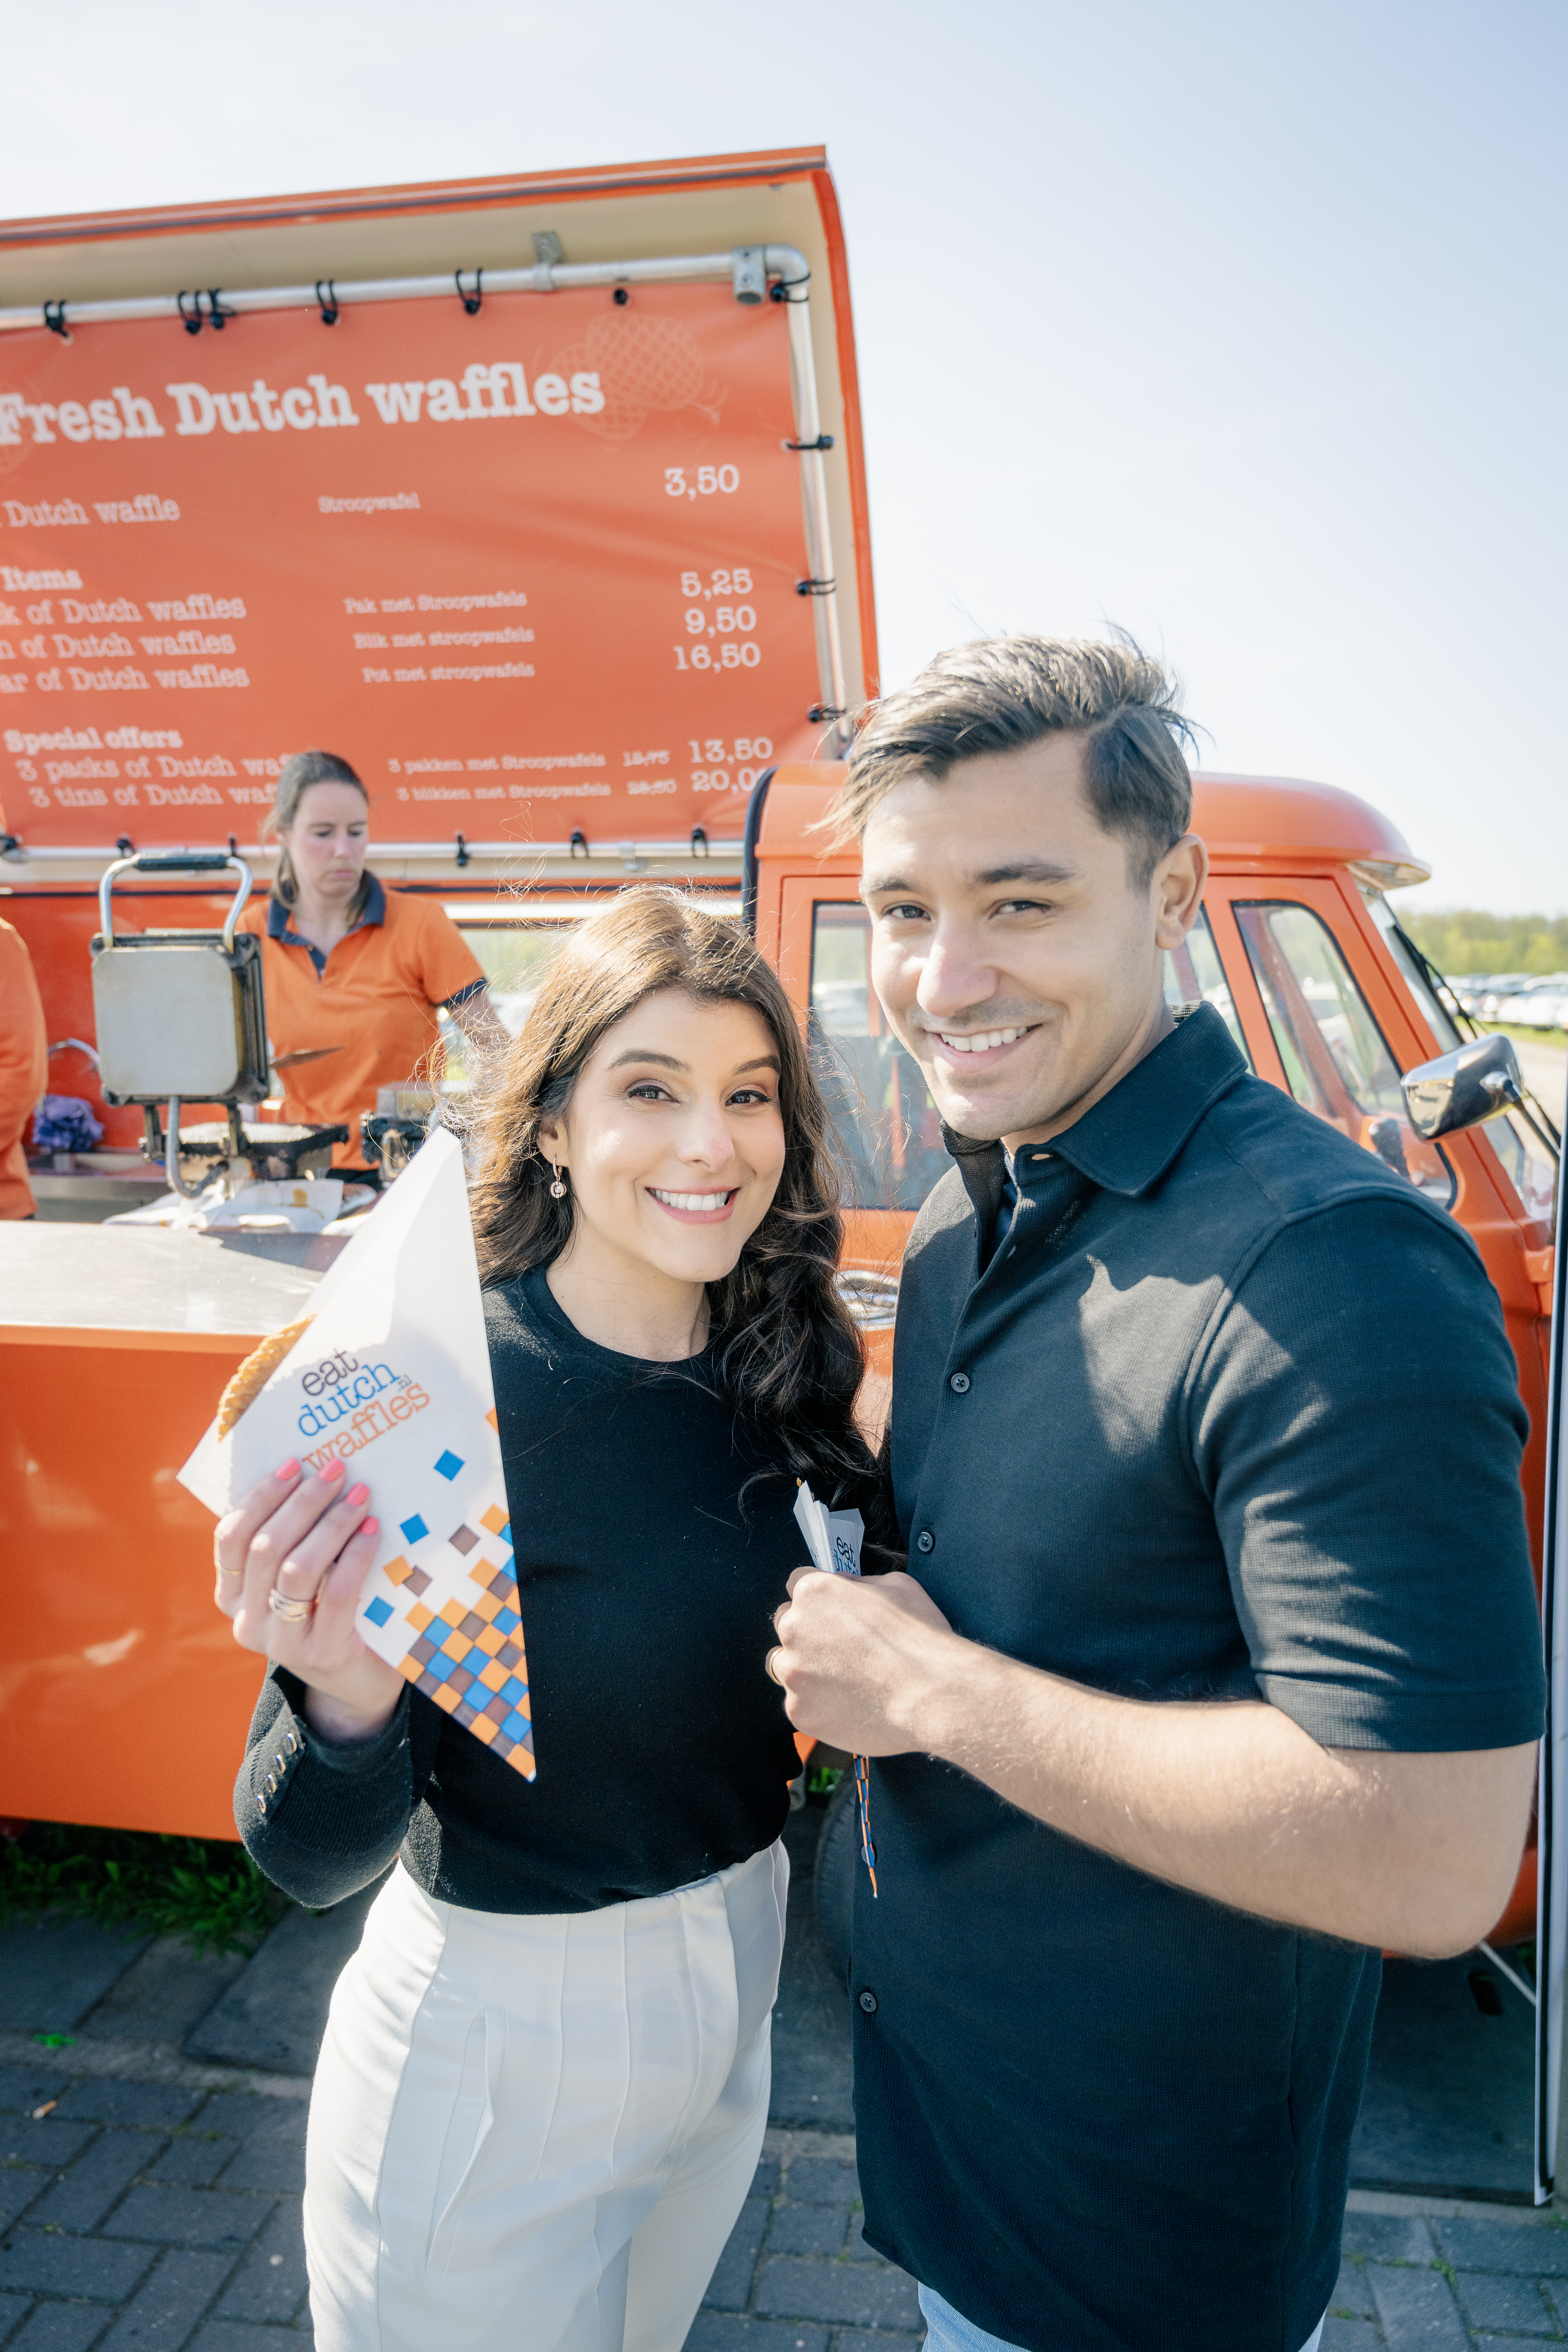 A woman and a man stand and smile at the camera in front of the orange Fresh Dutch waffles van after buying their stroopwafels 